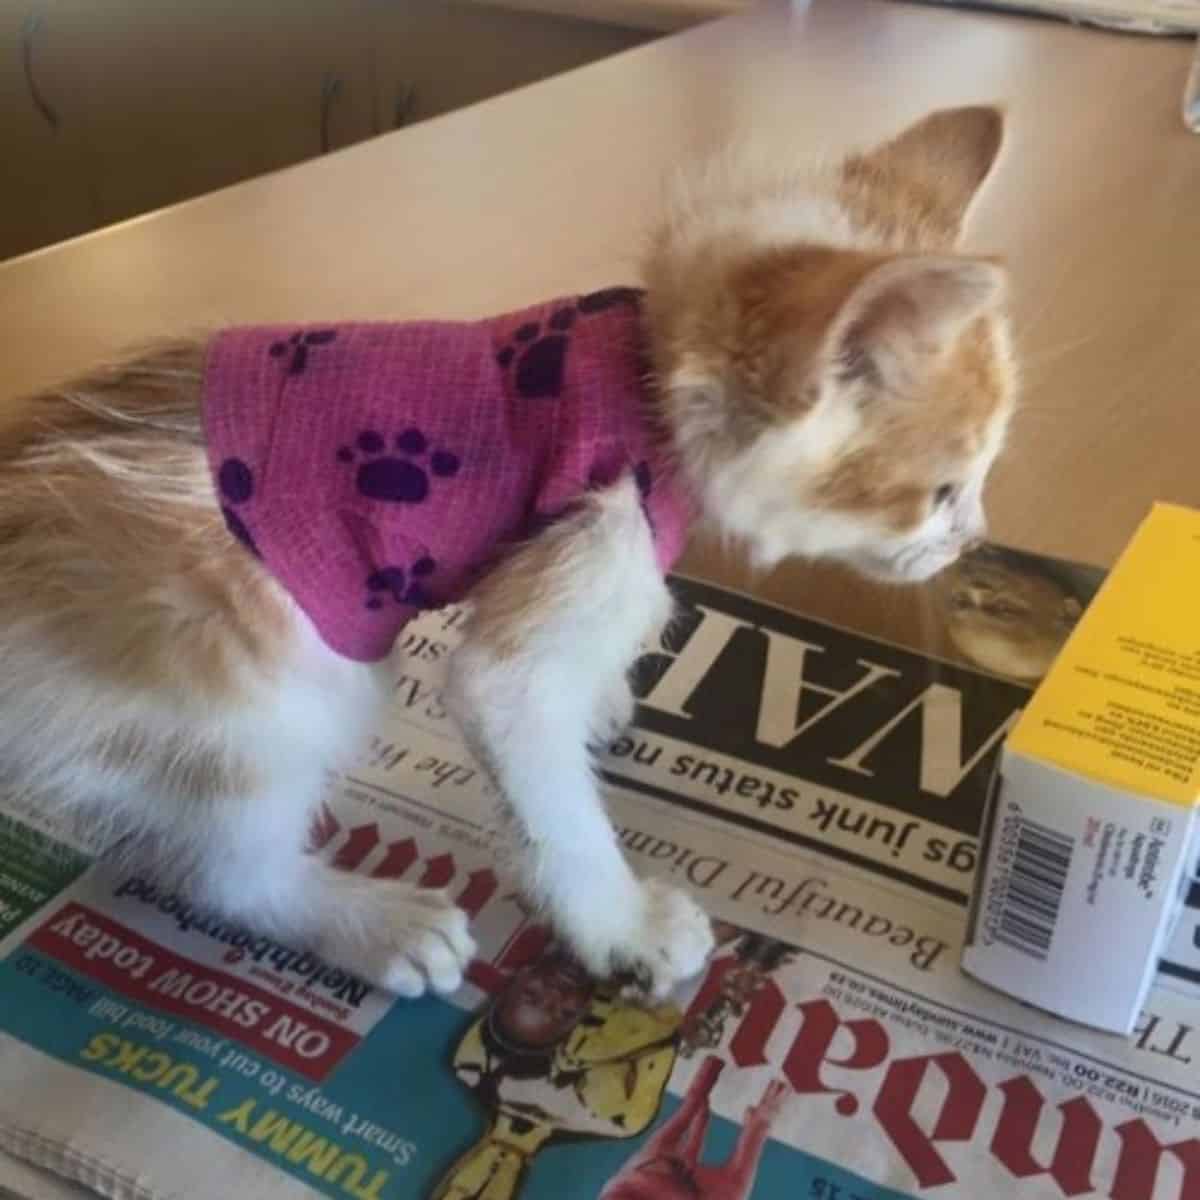 the kitten is on the newspaper